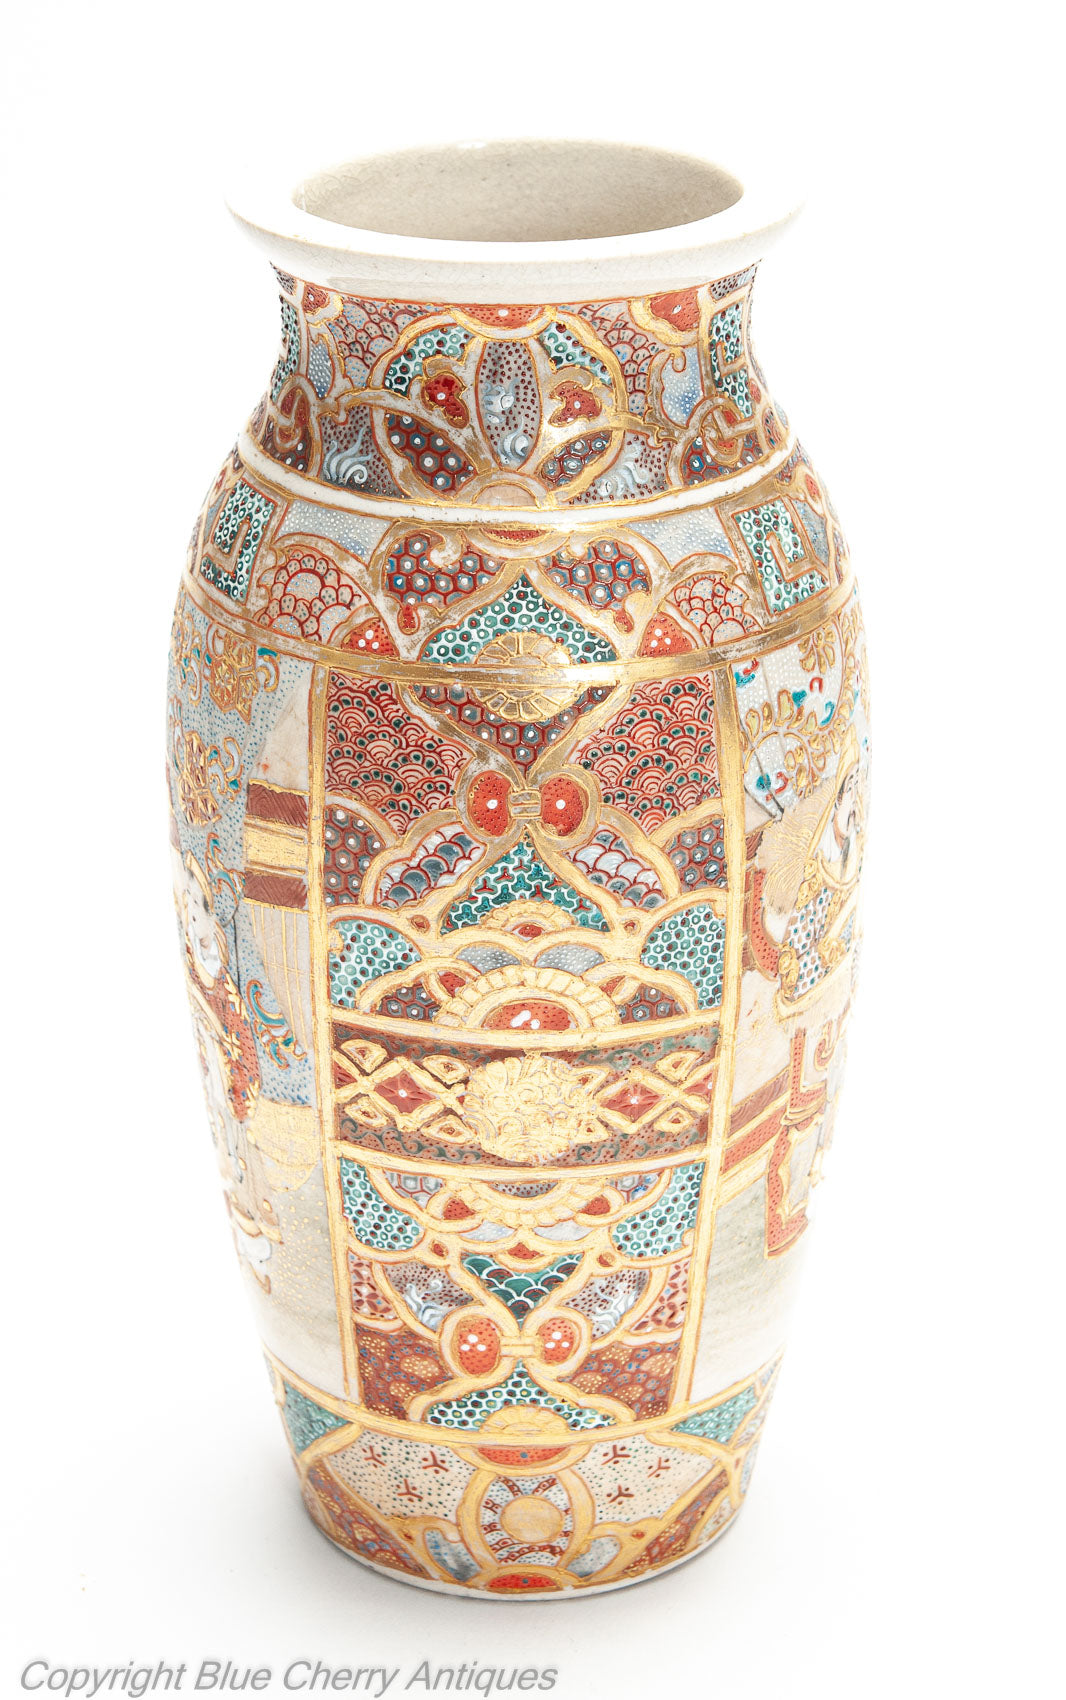 Antique Japanese Satsuma Ware Pottery Vase with Intricate Patterns & Figures (Code 1997)